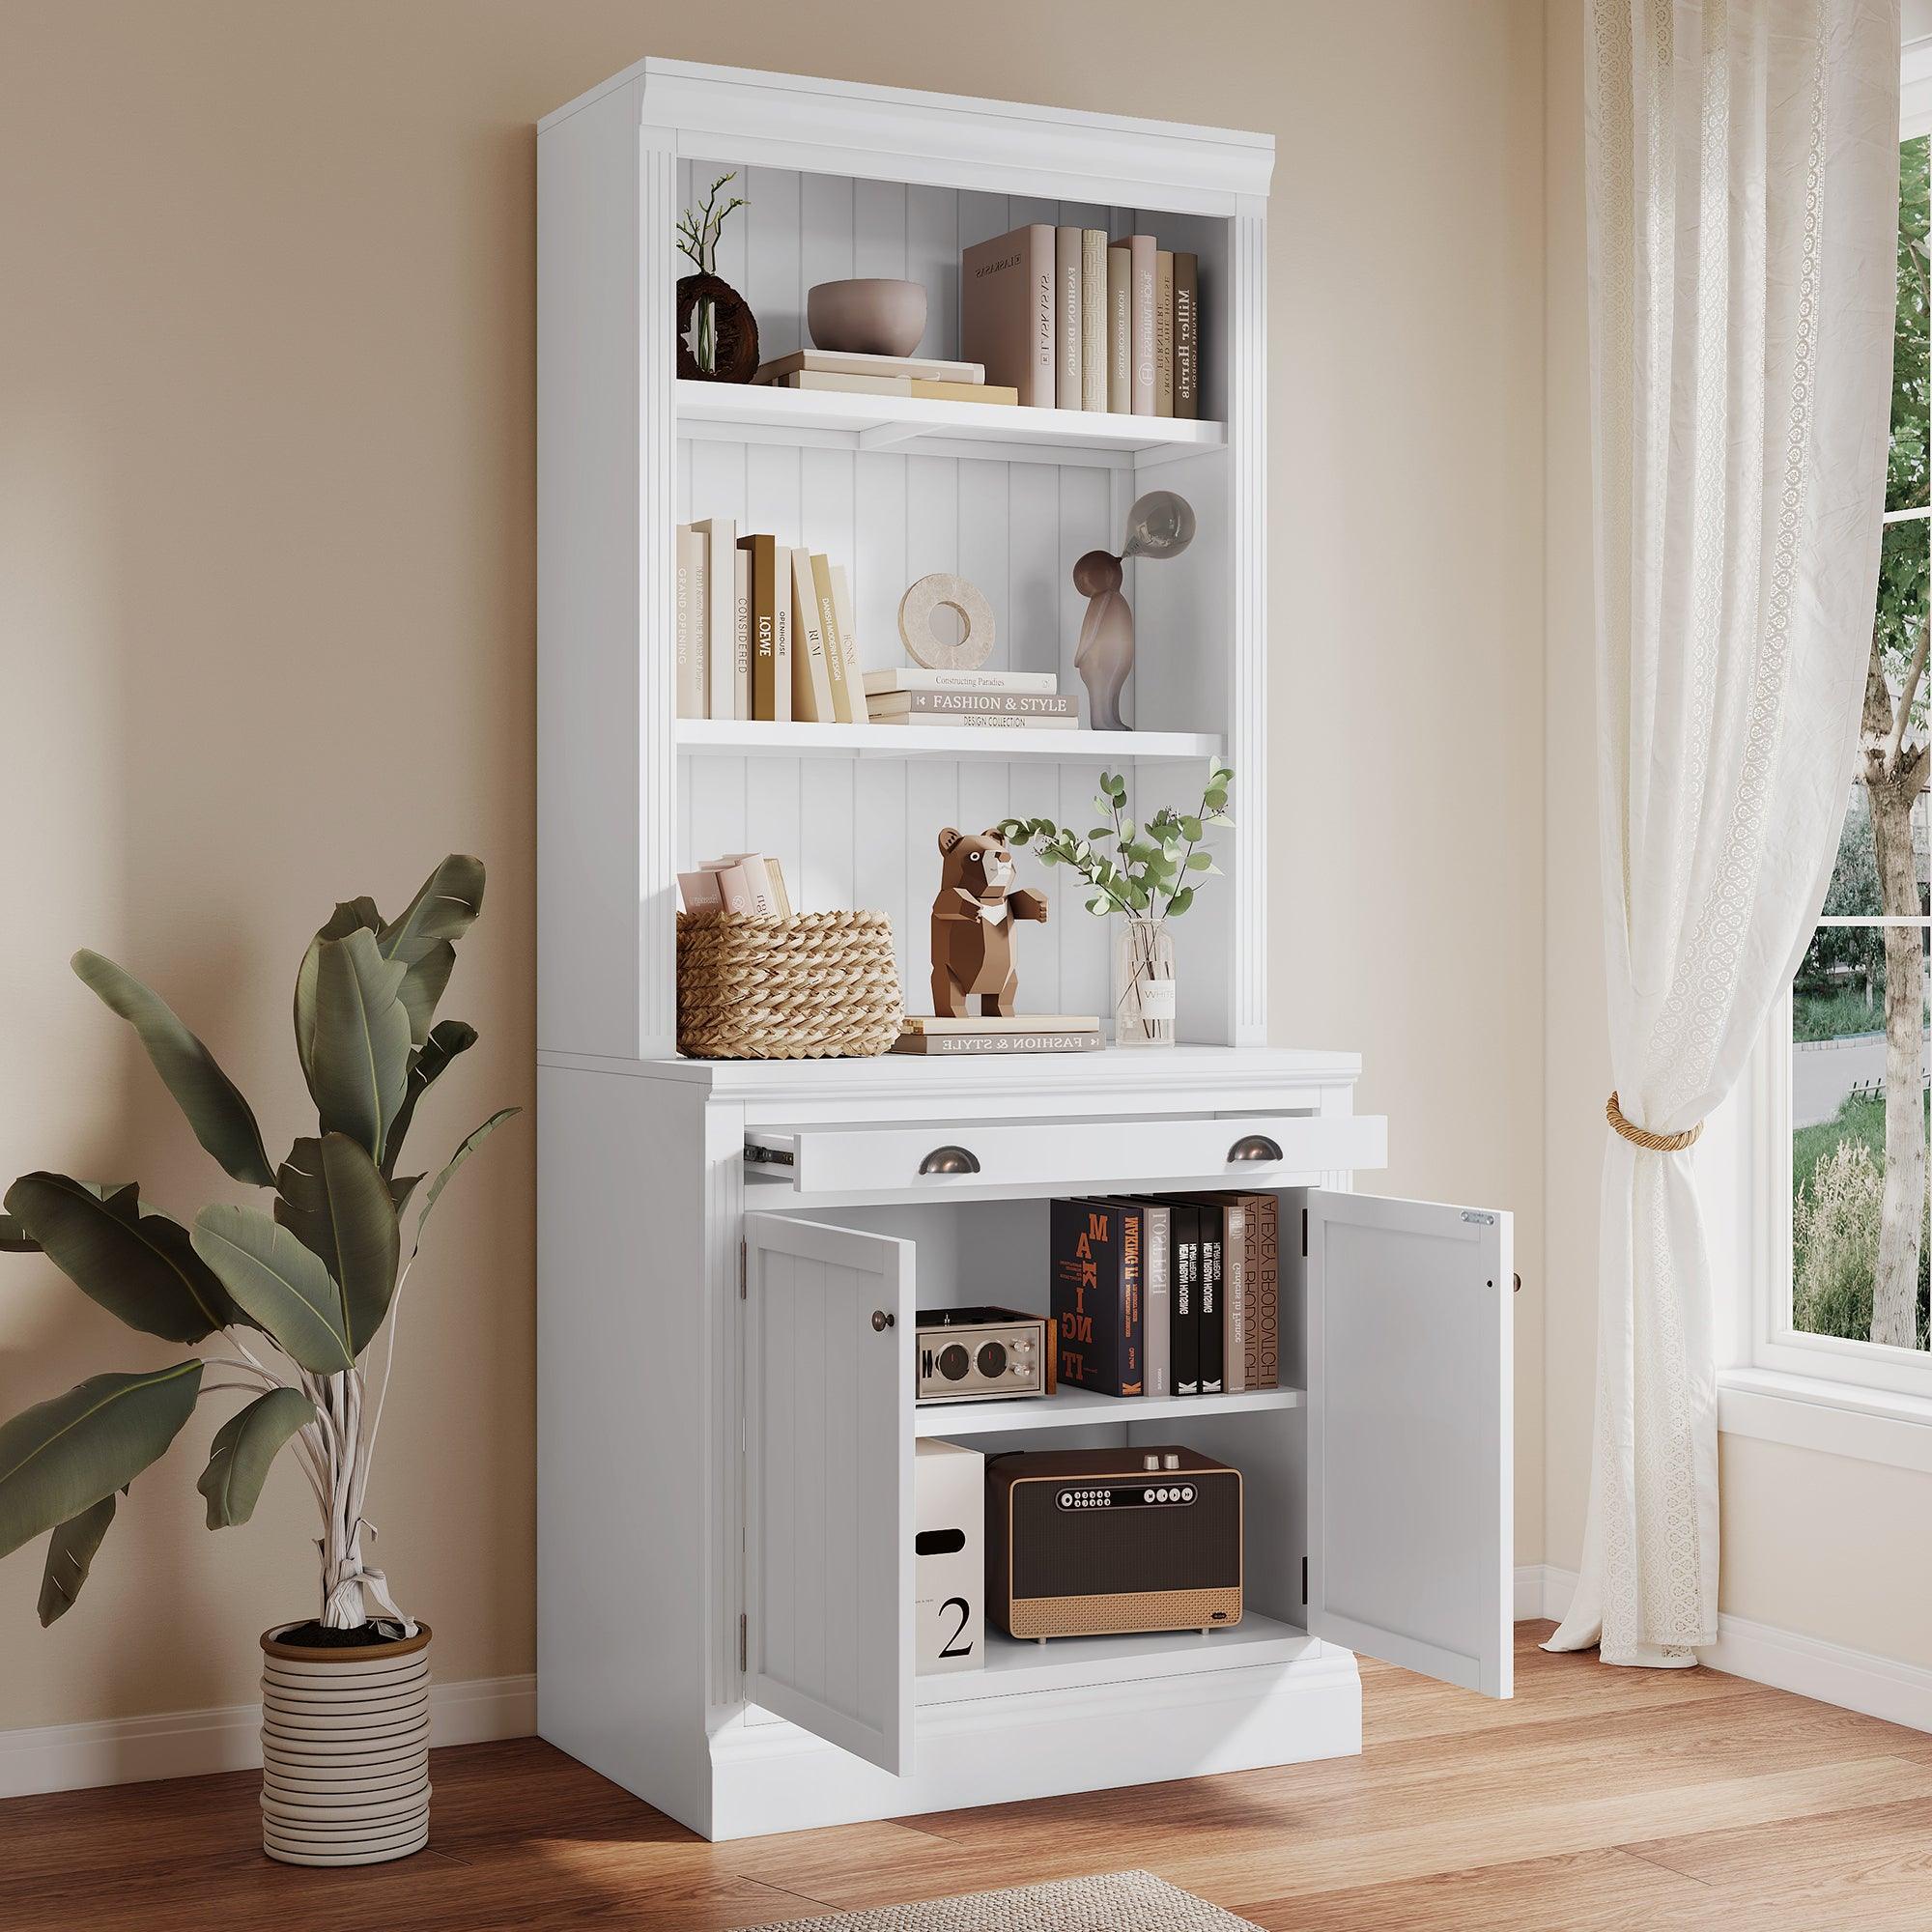 🆓🚛 83.4" Tall Bookshelf With Led Lighting, Modern Bookcase With 2 Doors & 1 Drawer, Storage Bookcase With Open Shelves for Living Room, Home Office, White